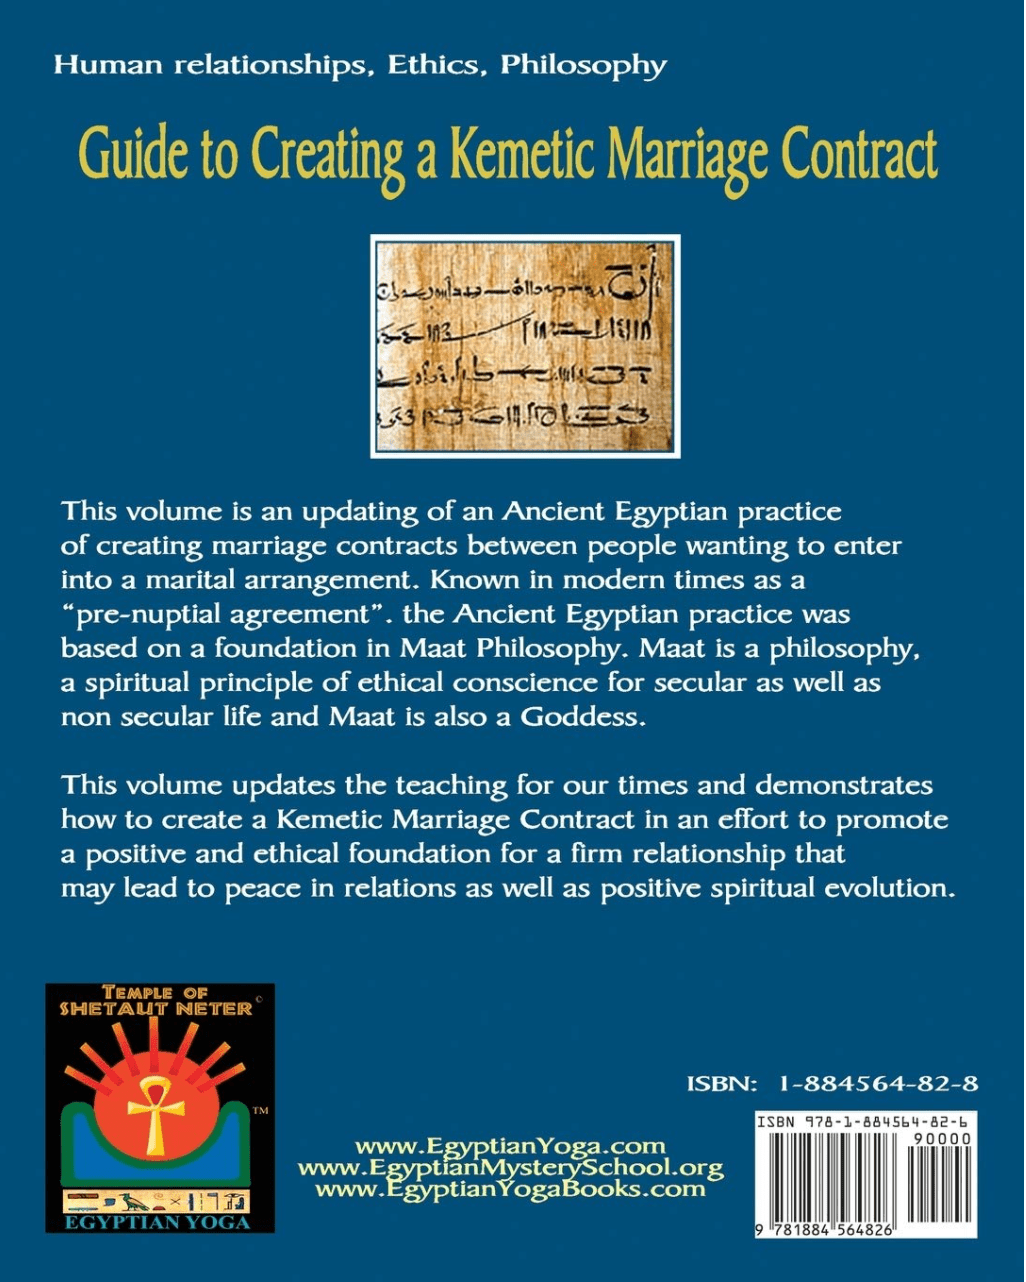 Guide to Creating a Kemetic Marriage Contract - Spiral Circle